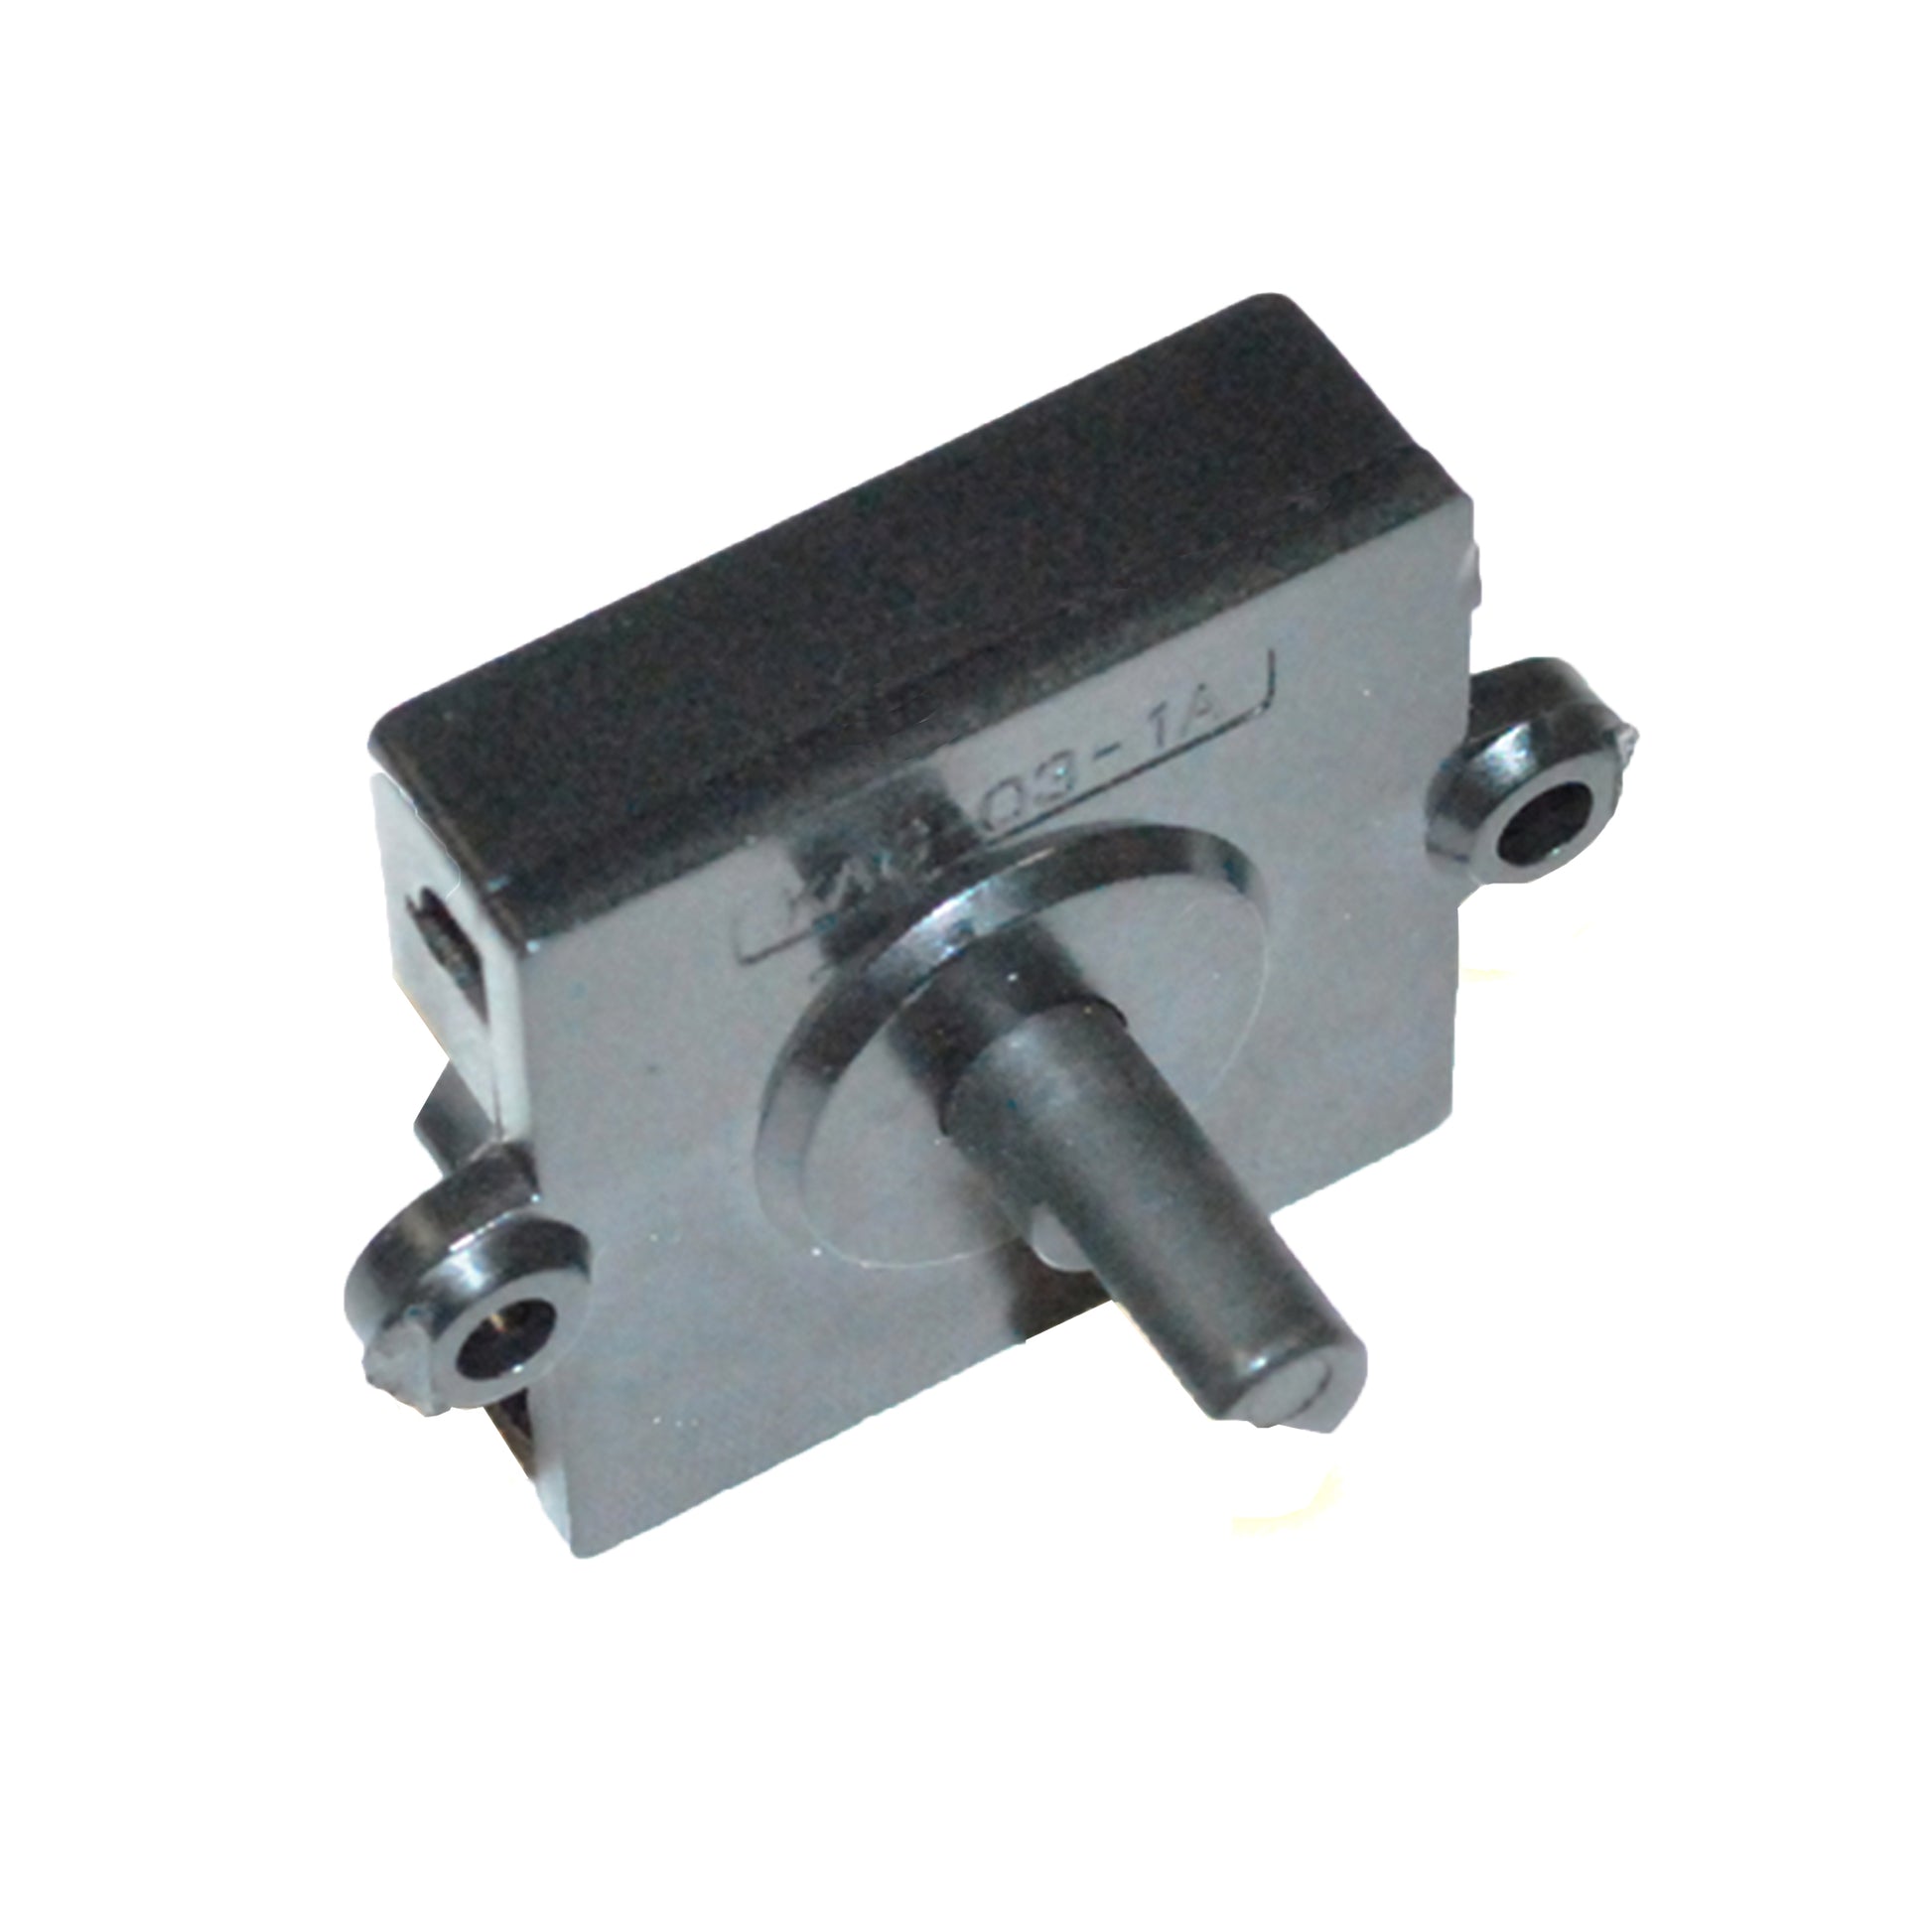 Switch for P-130A Air Mover